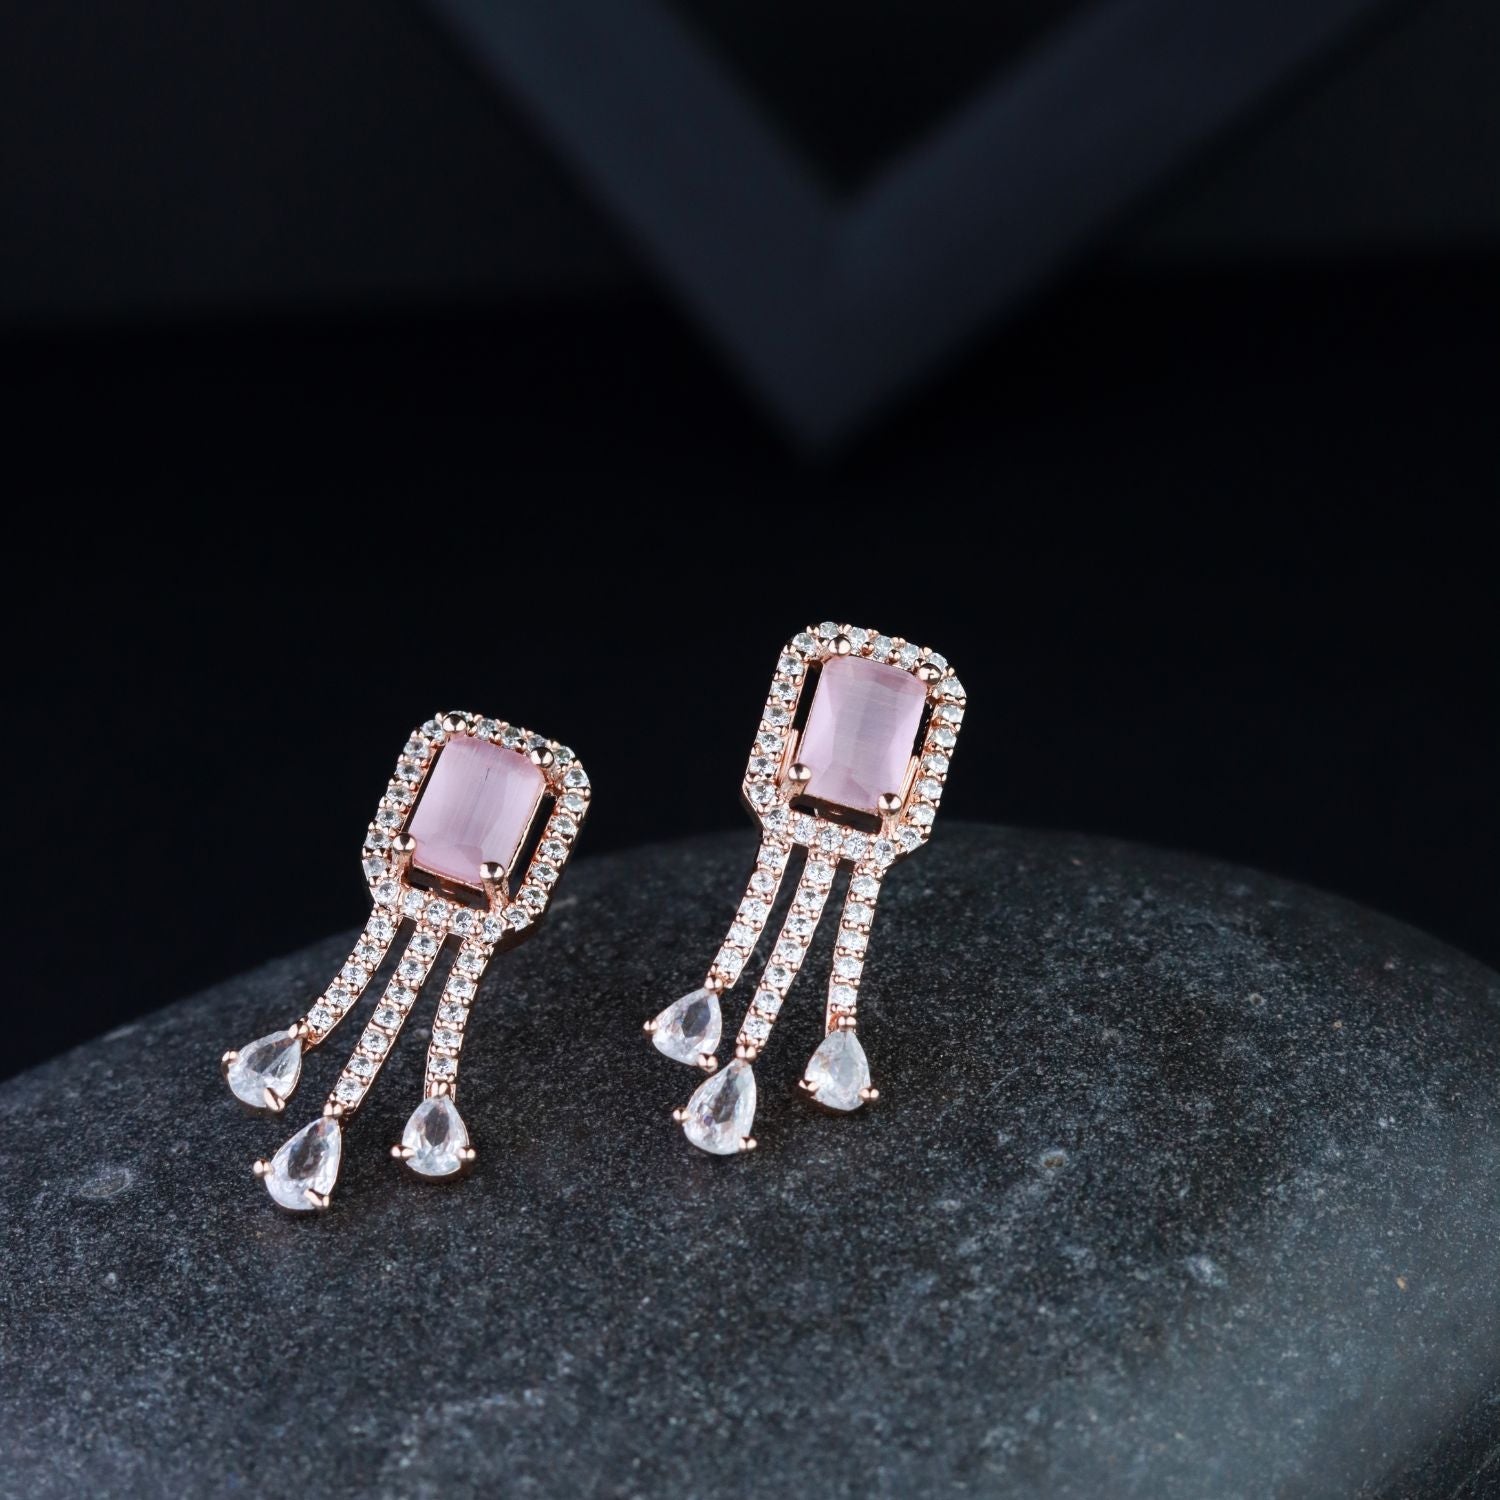 Women's Valentine'S Special 18K Rose Gold Plated Pink Cz & American Diamond Beautiful Studs Earrings (E3067Pi) - I Jewels